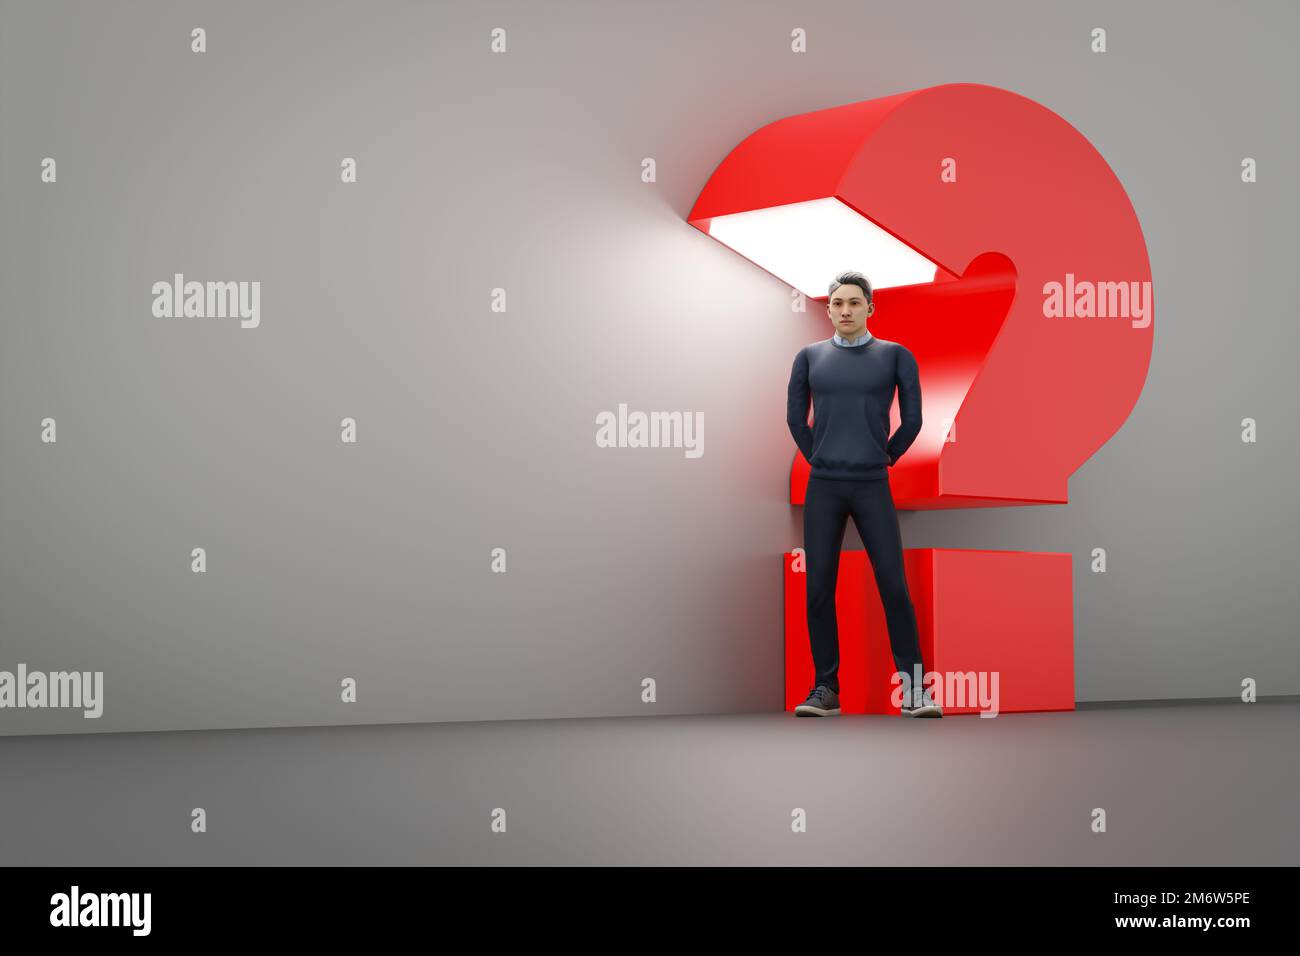 Man with huge red question mark light background Stock Photo